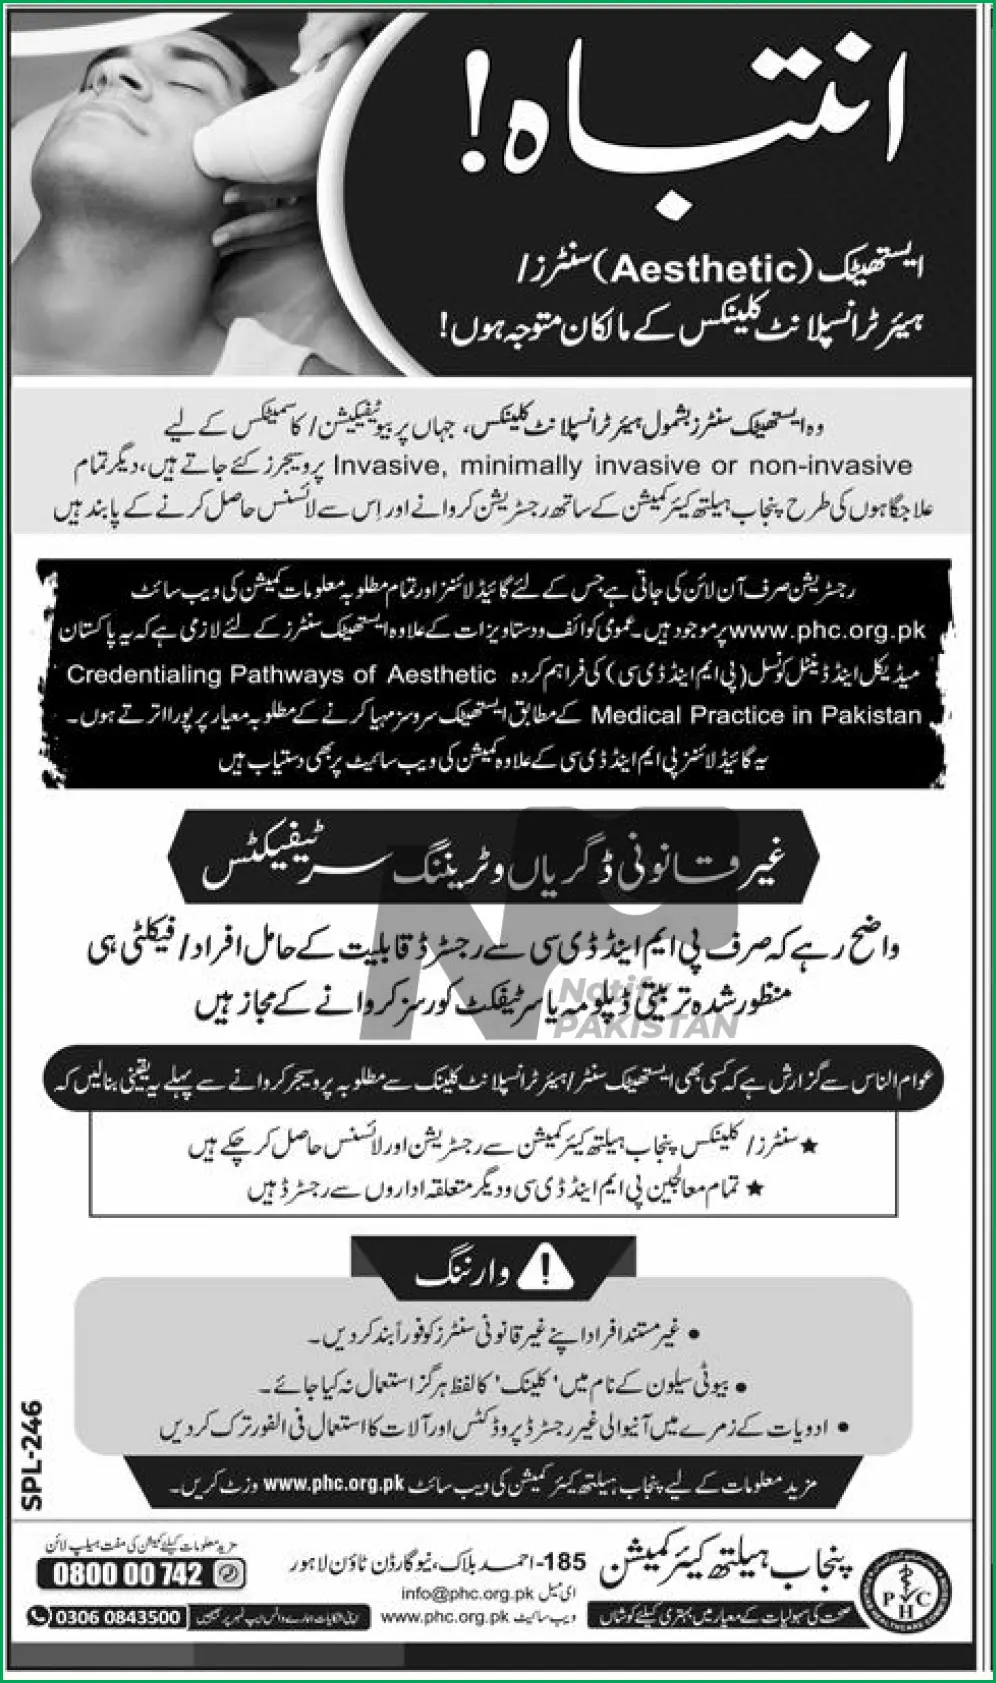 Notification for Owners of Aesthetic Centers and Hair Transplant Clinics